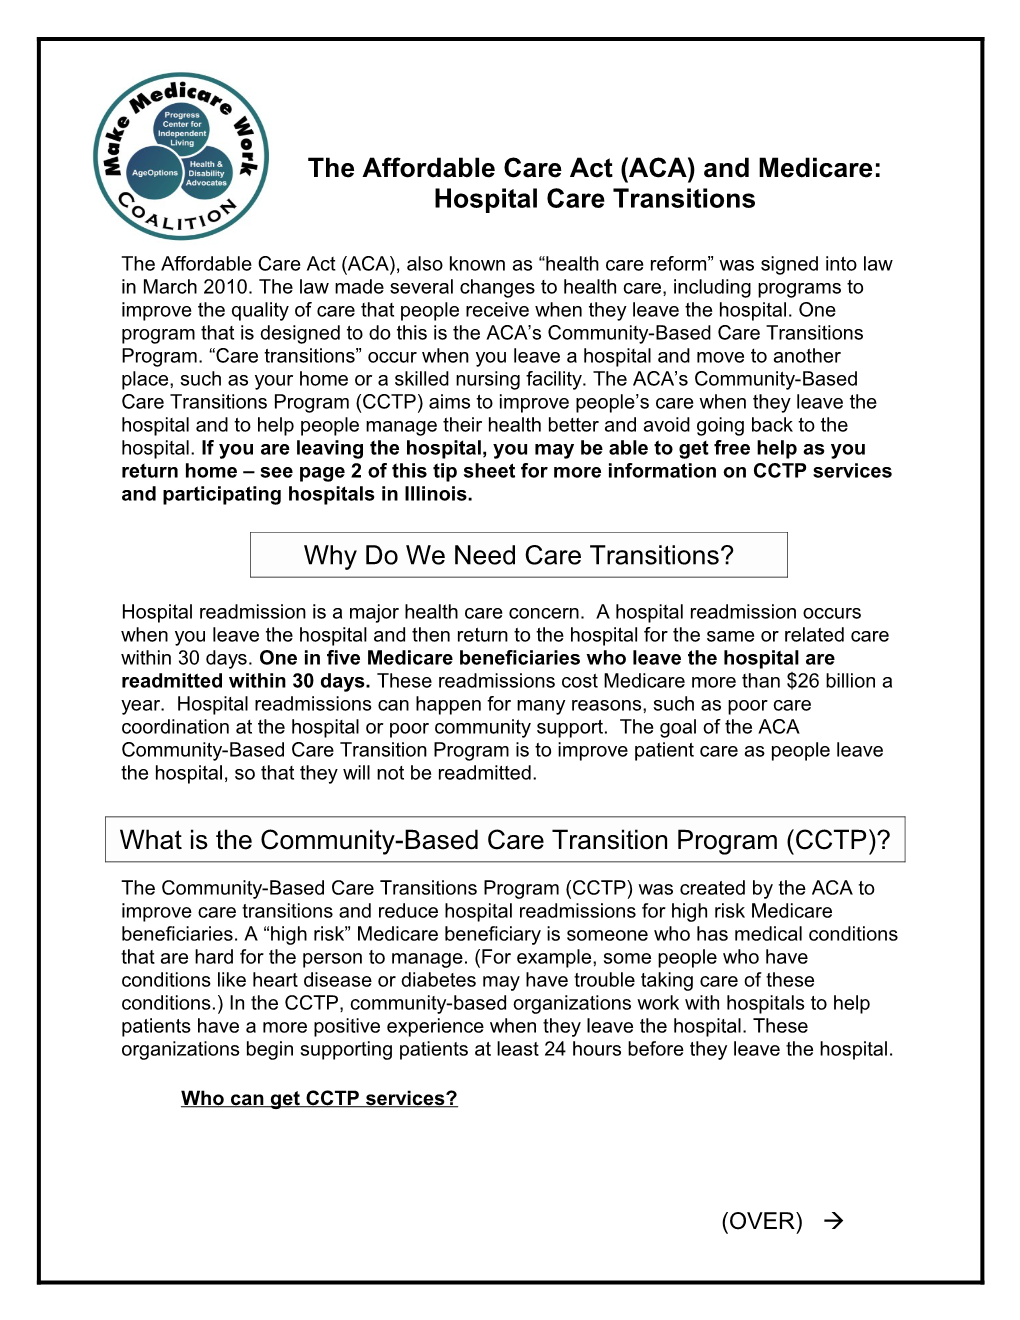 The Affordable Care Act (ACA) and Medicare: Hospital Care Transitions